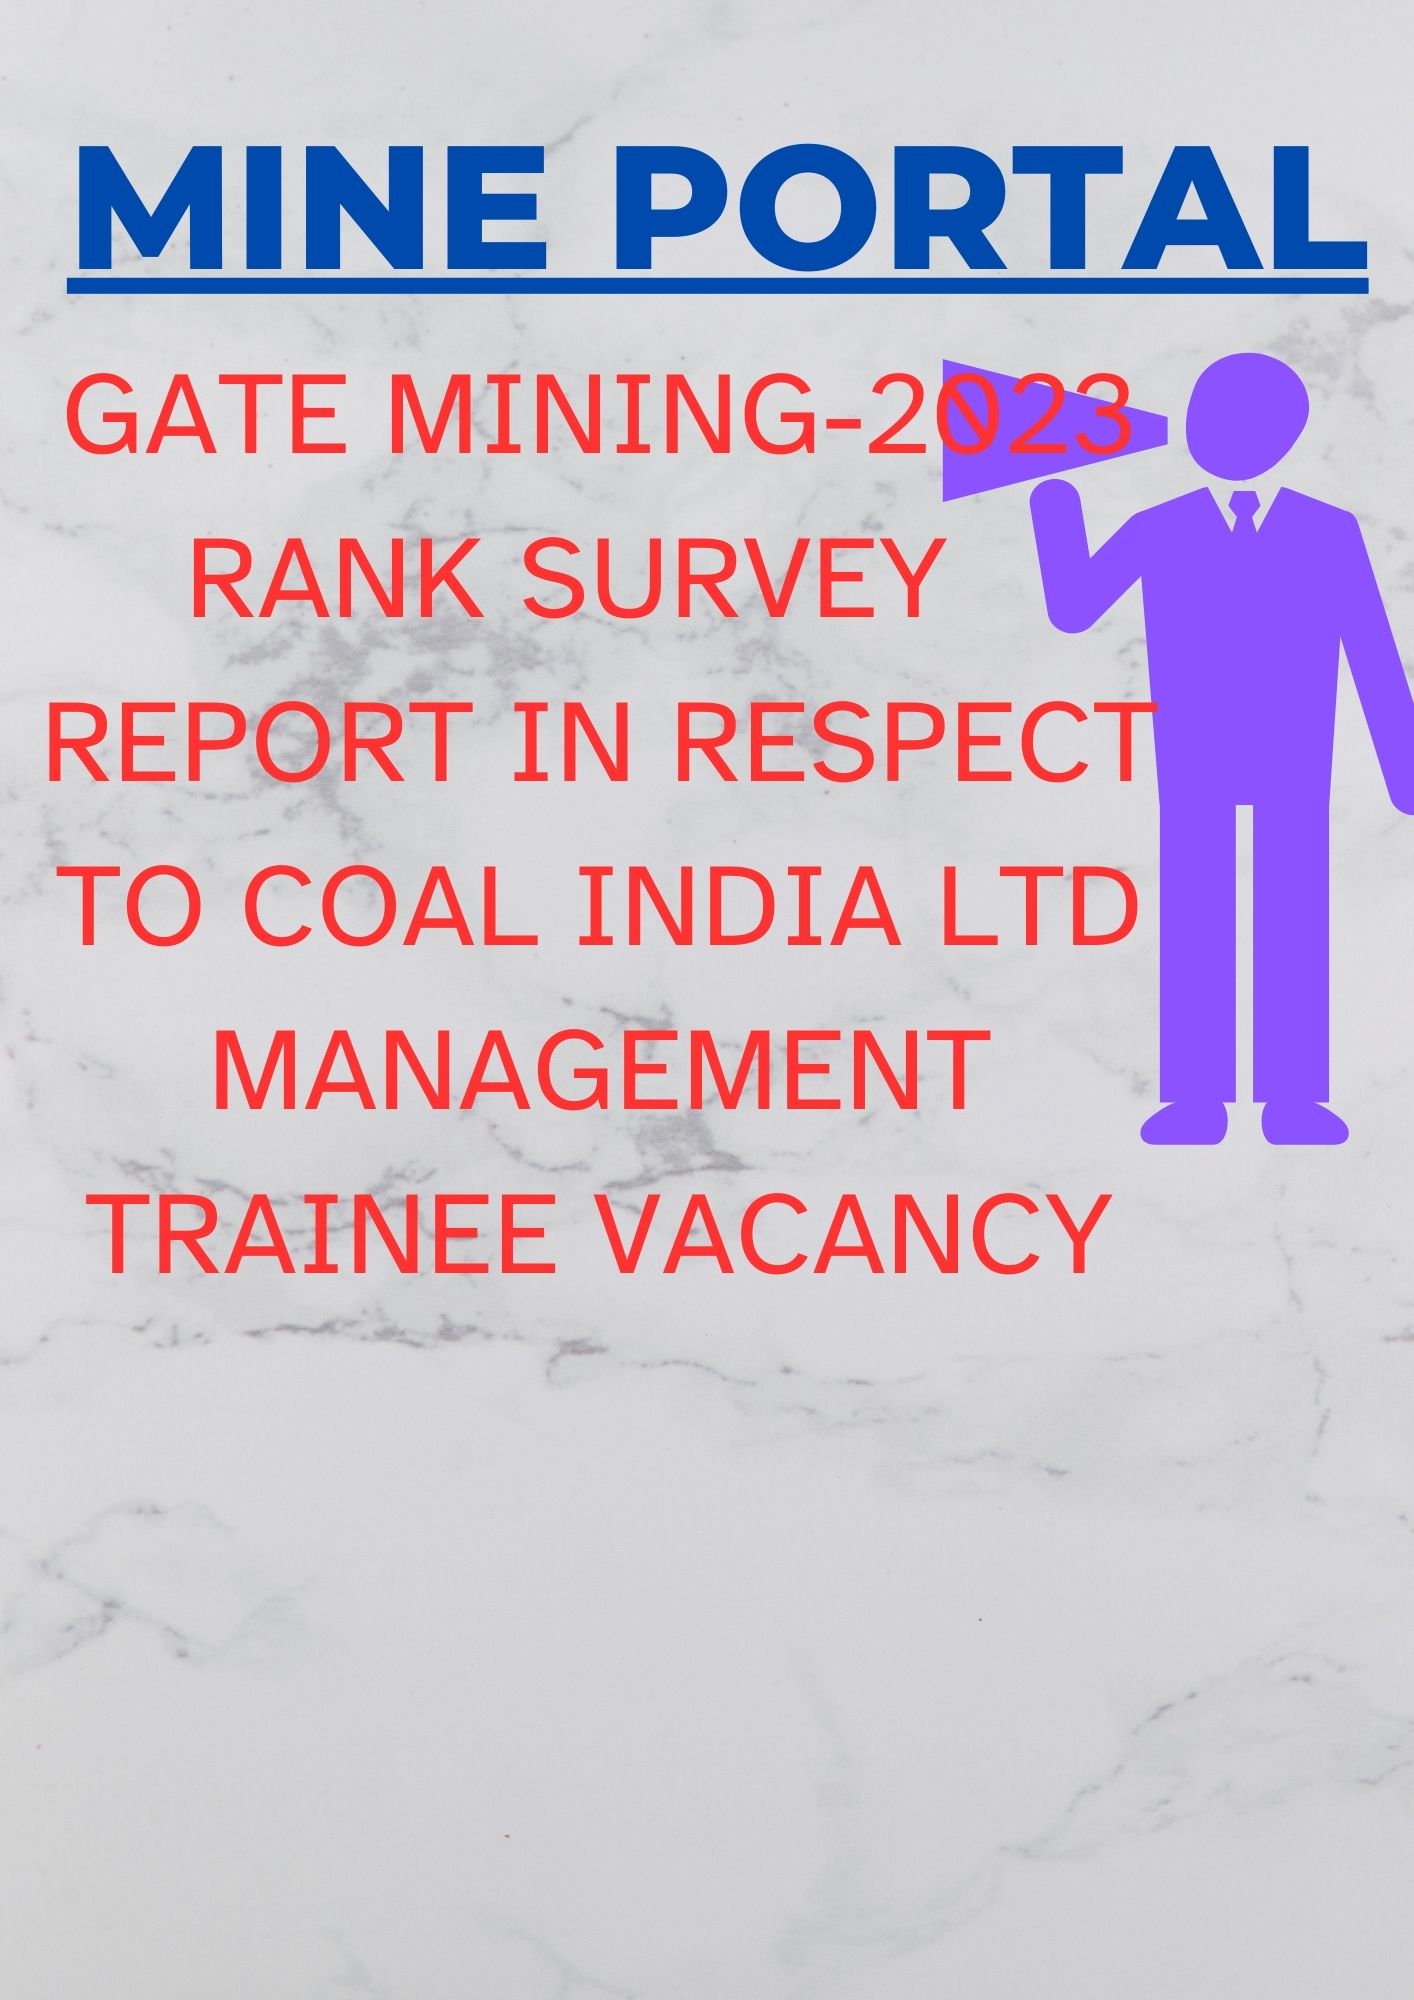 GATE-2023 SURVEY REPORT IN RESPECT TO COAL INDIA MANAGEMENT TRAINEE 2023 VACANCY